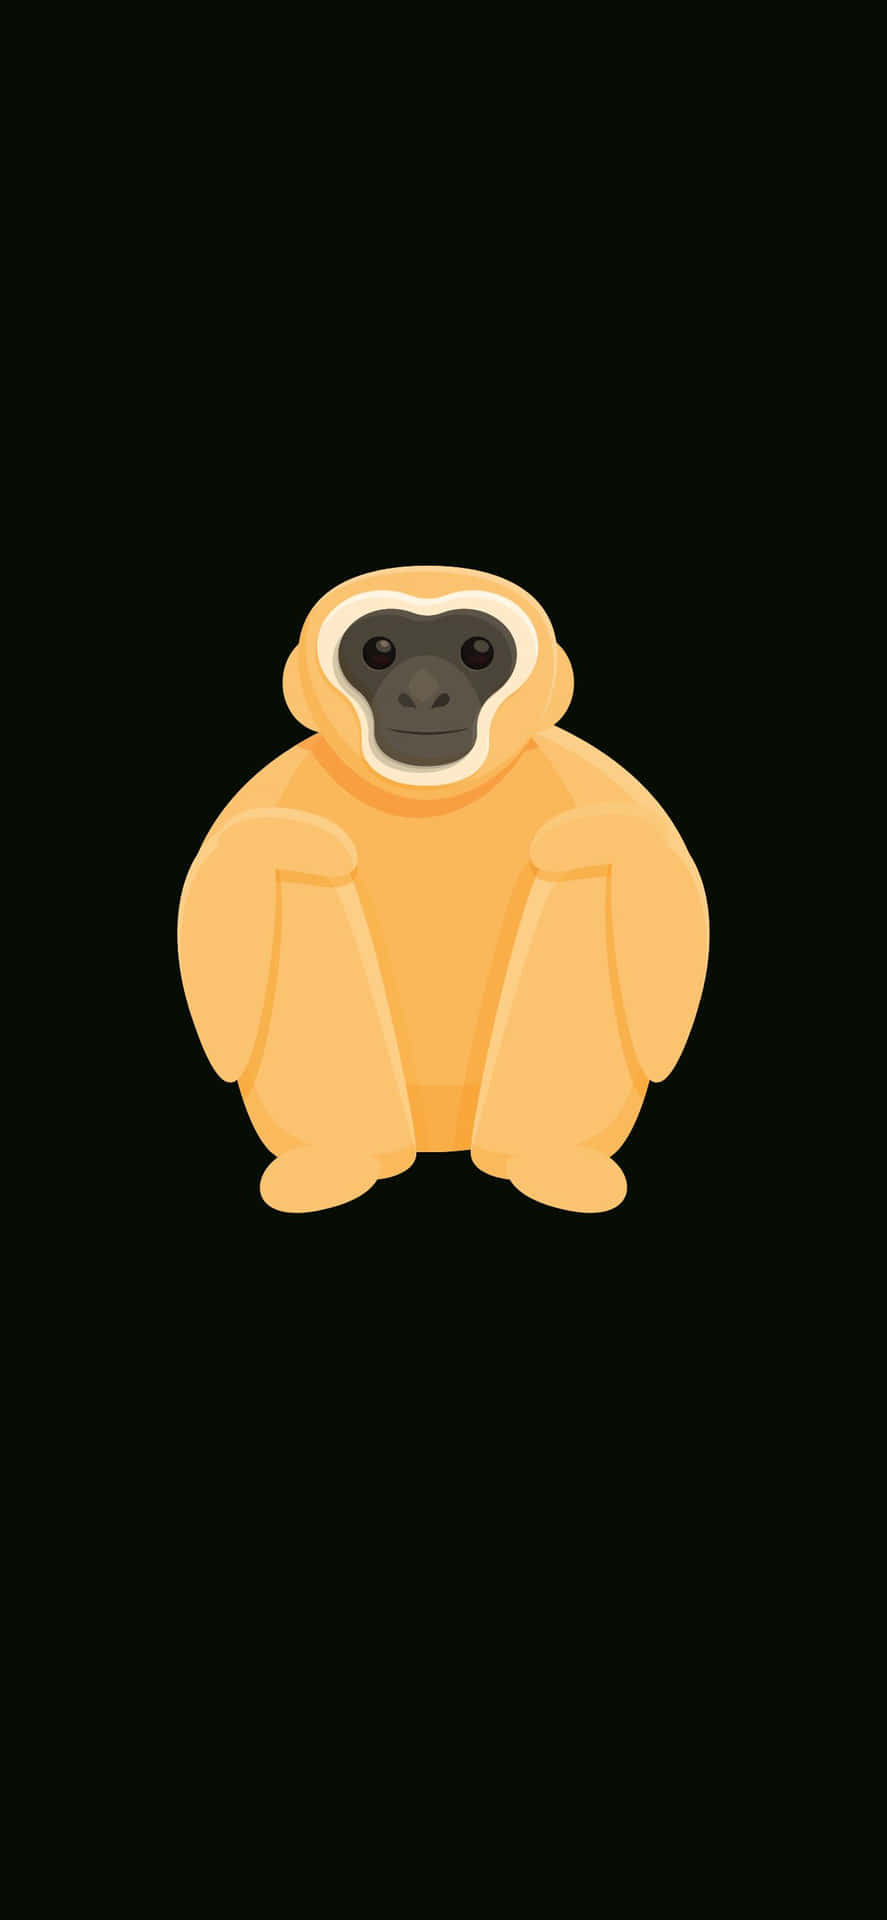 The Marvelous Iphone Xs Max Gibbon